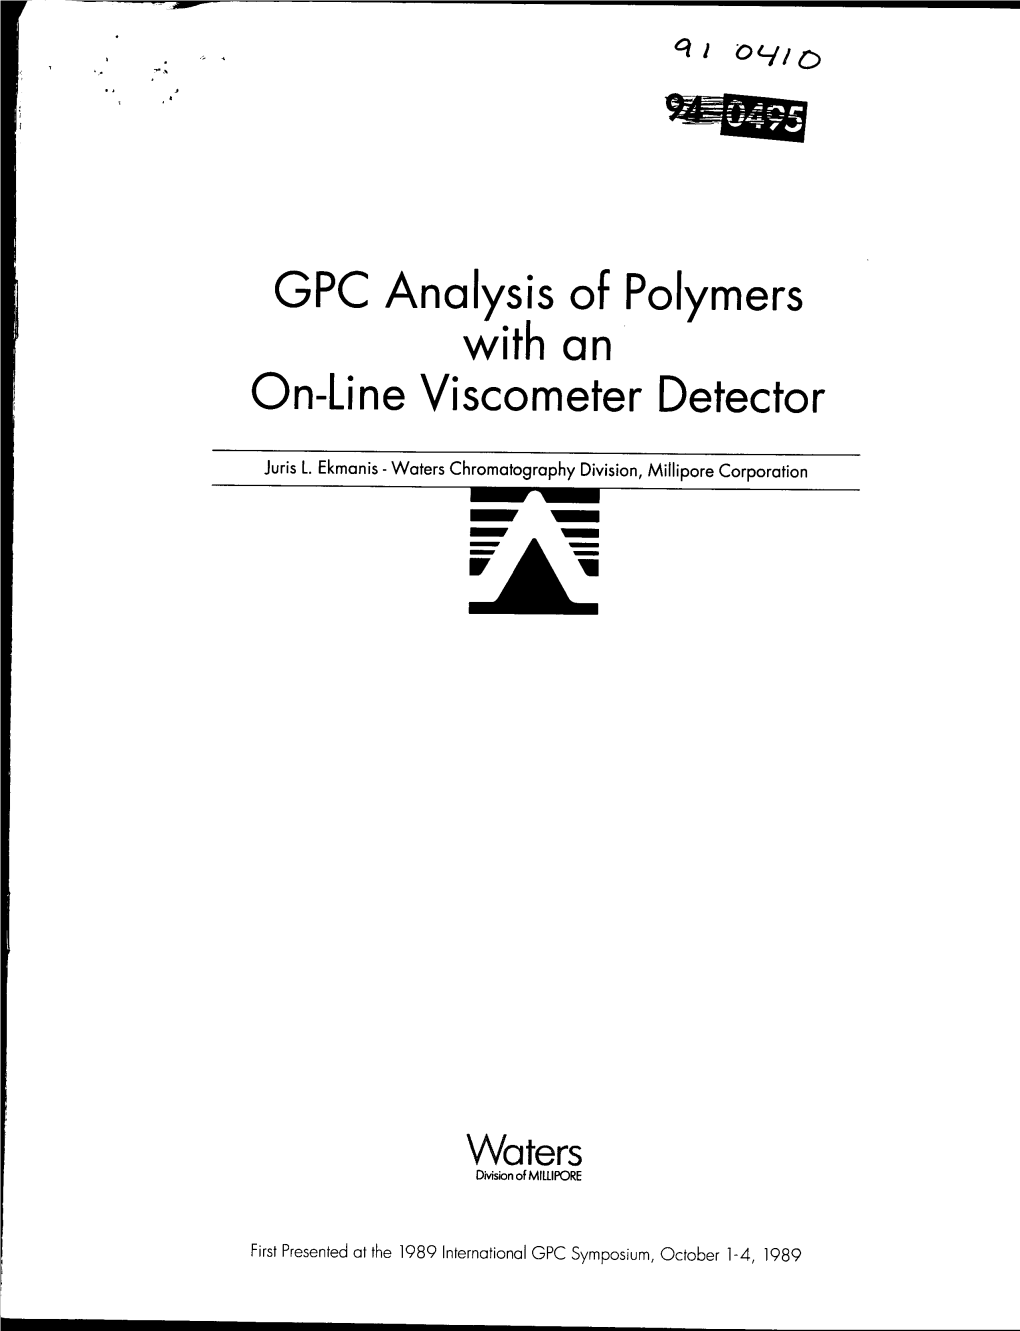 GPC Analysis of Polymers with an On-Line Viscometer Detector